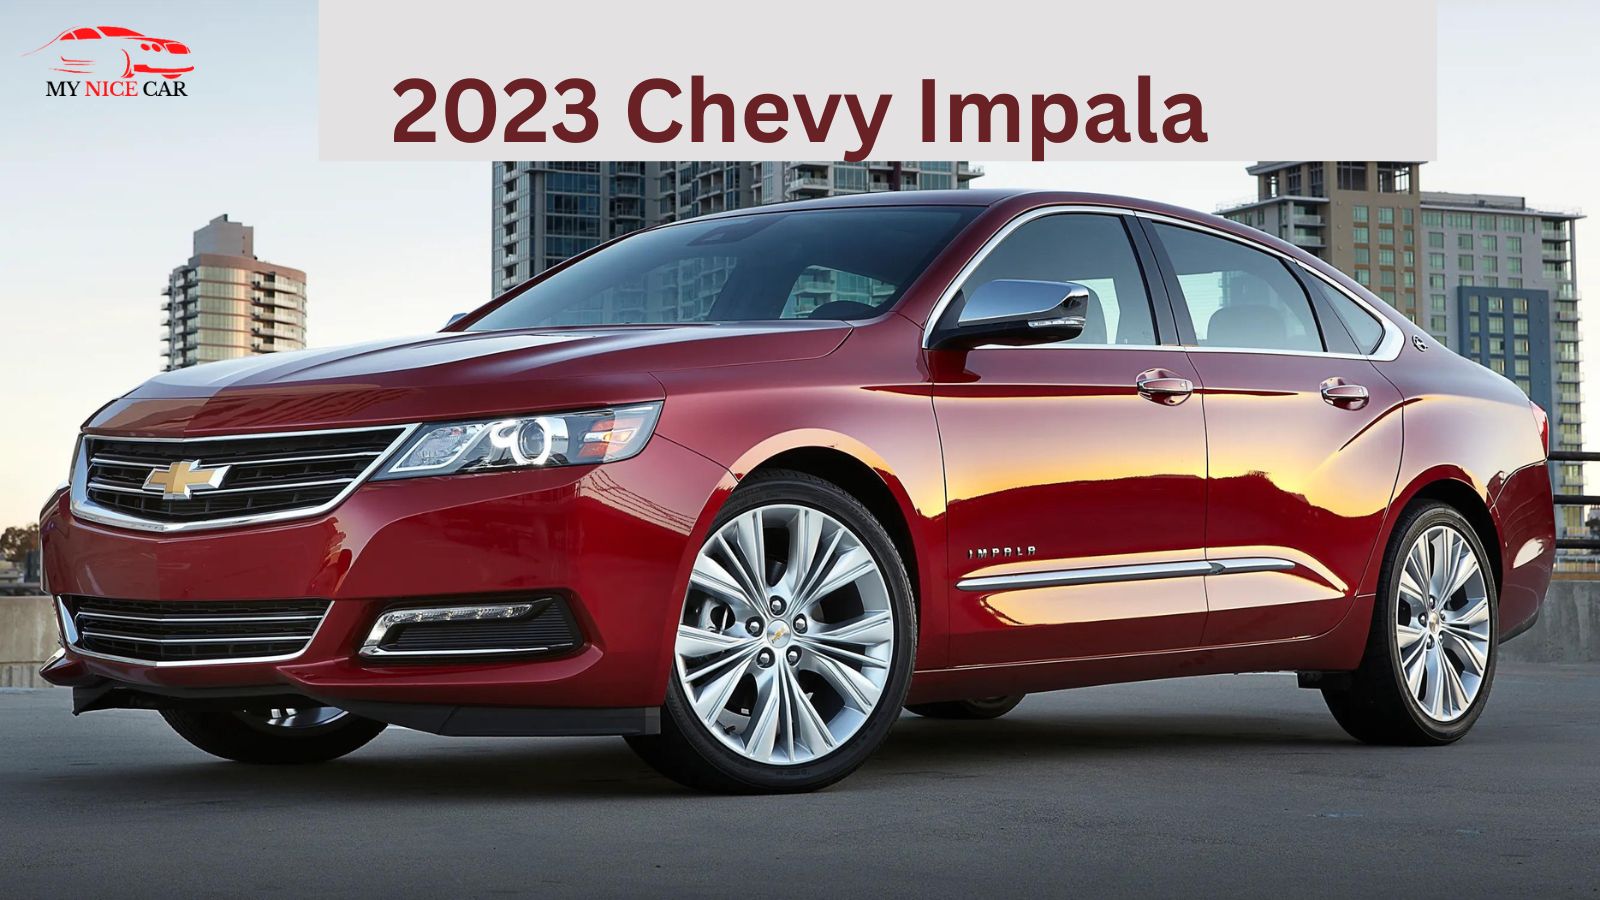 You are currently viewing 2023 Chevy Impala Review – Release Date, Prices And Specifications